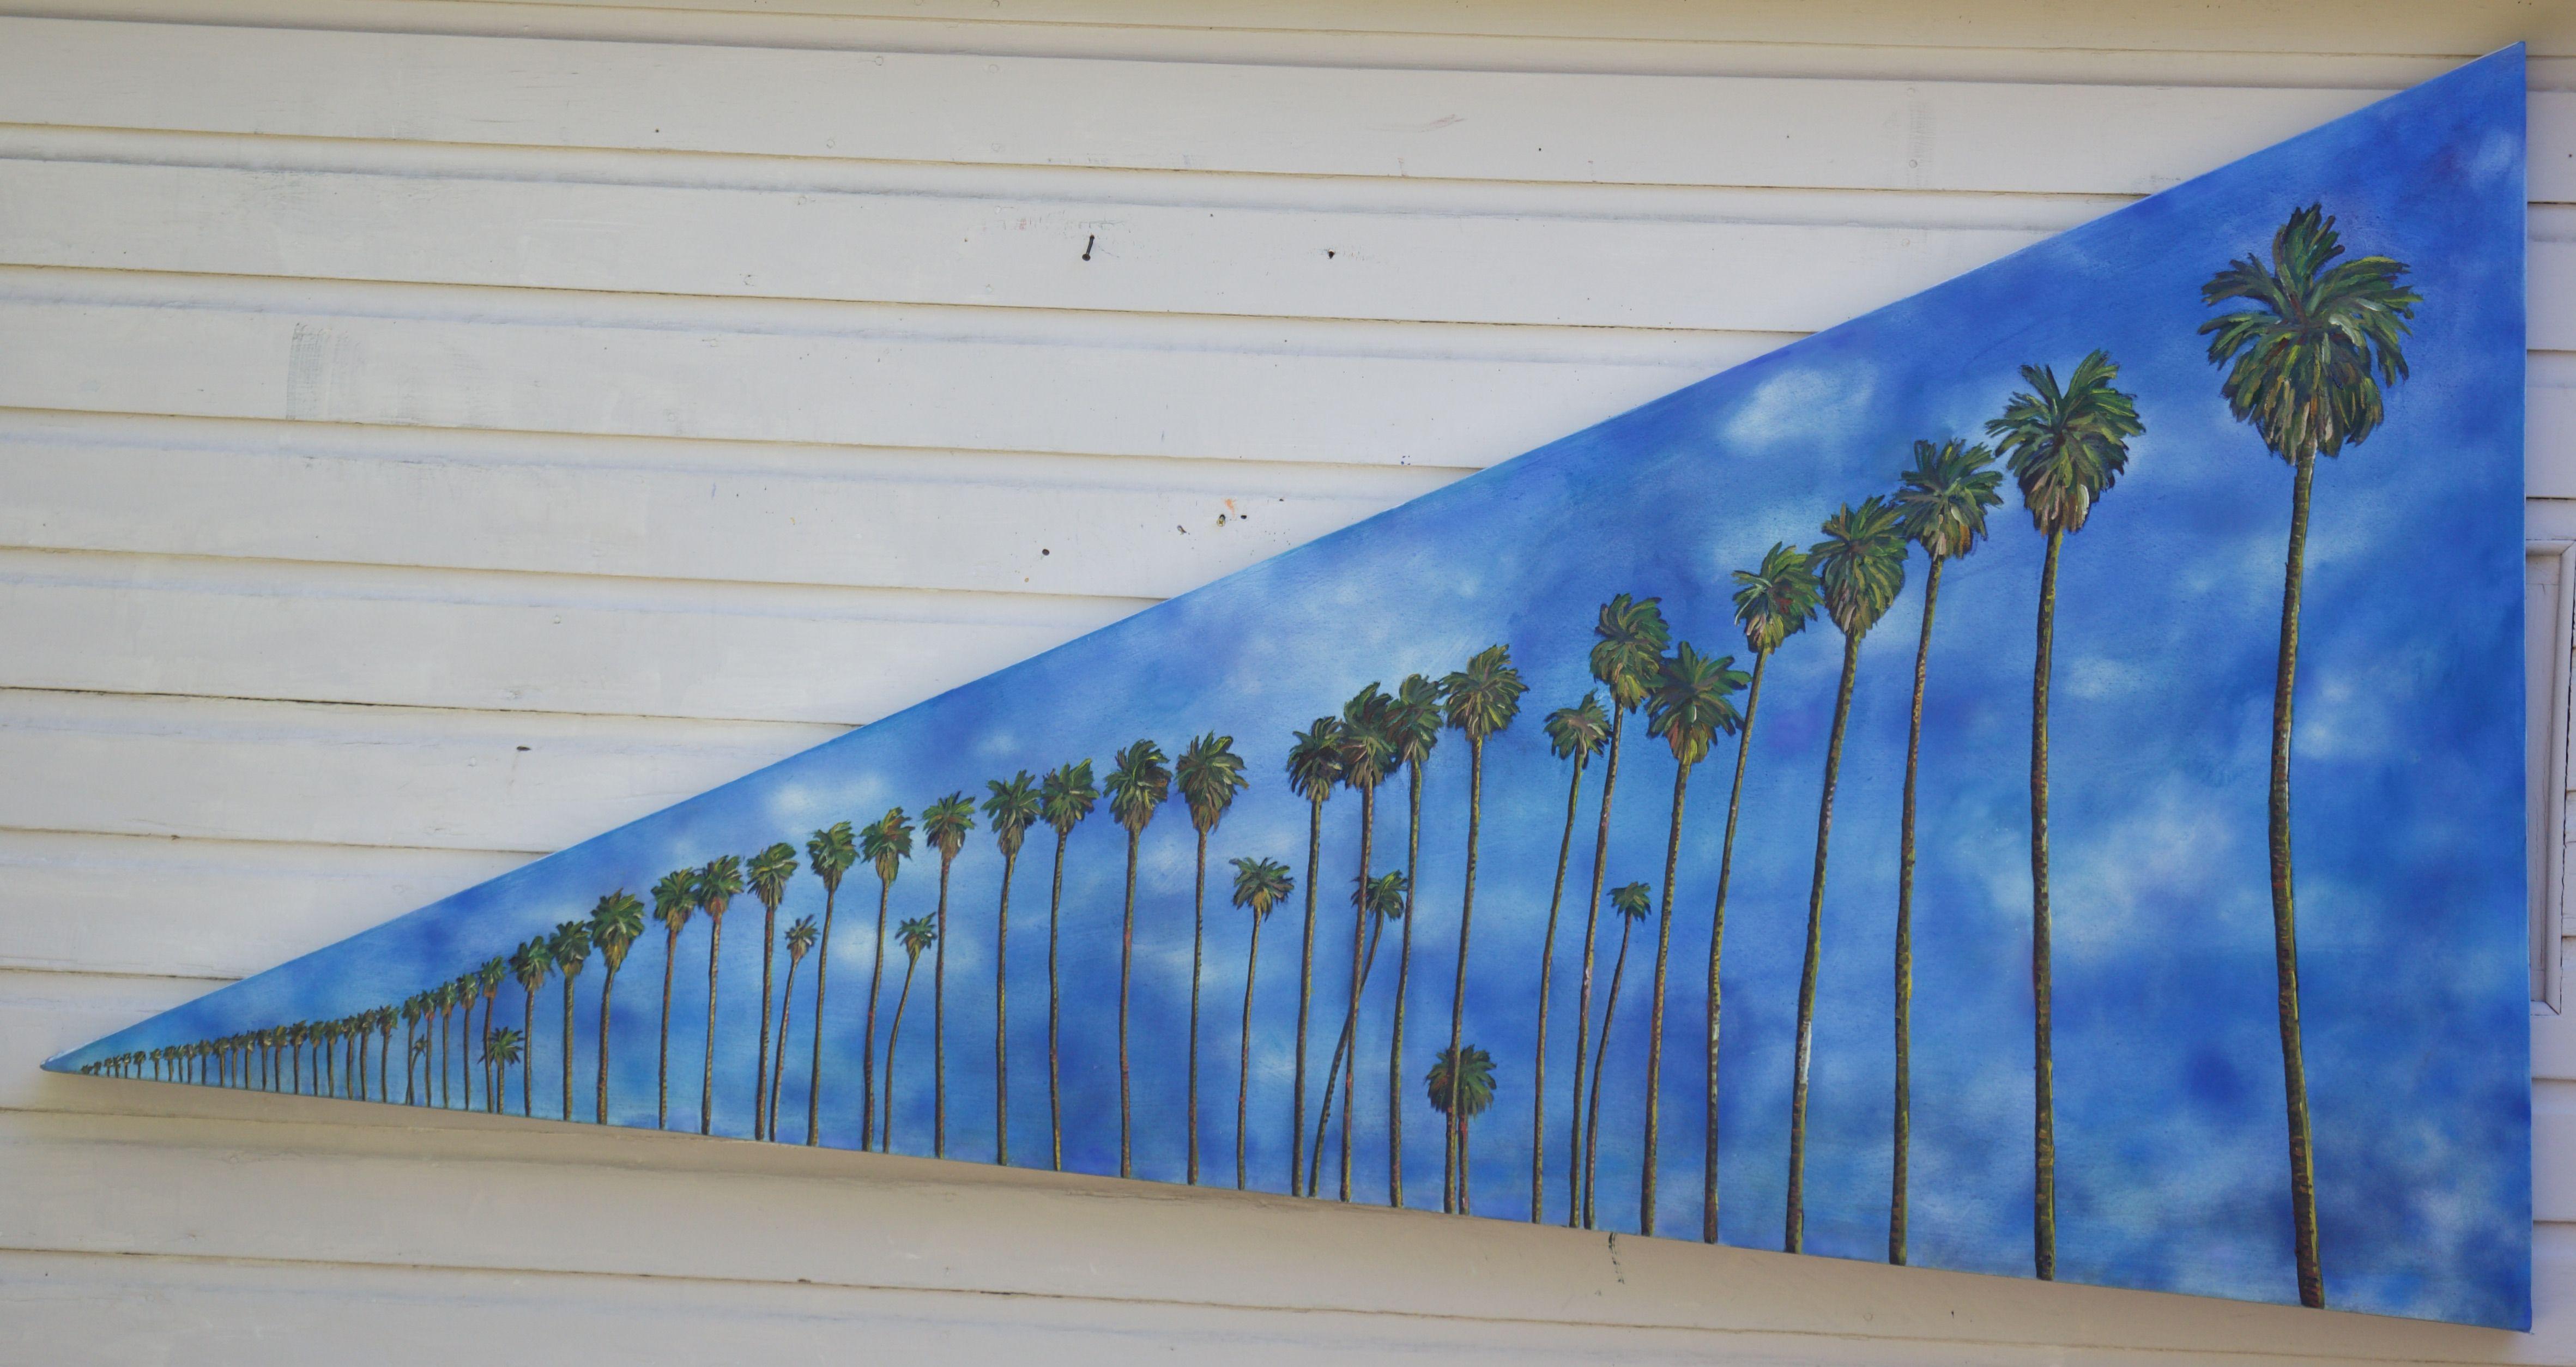 I always liked seeing the palm trees going into the horizon and thought it would be interesting to capture that feeling on a triangle shaped canvas. :: Painting :: Pop-Art :: This piece comes with an official certificate of authenticity signed by